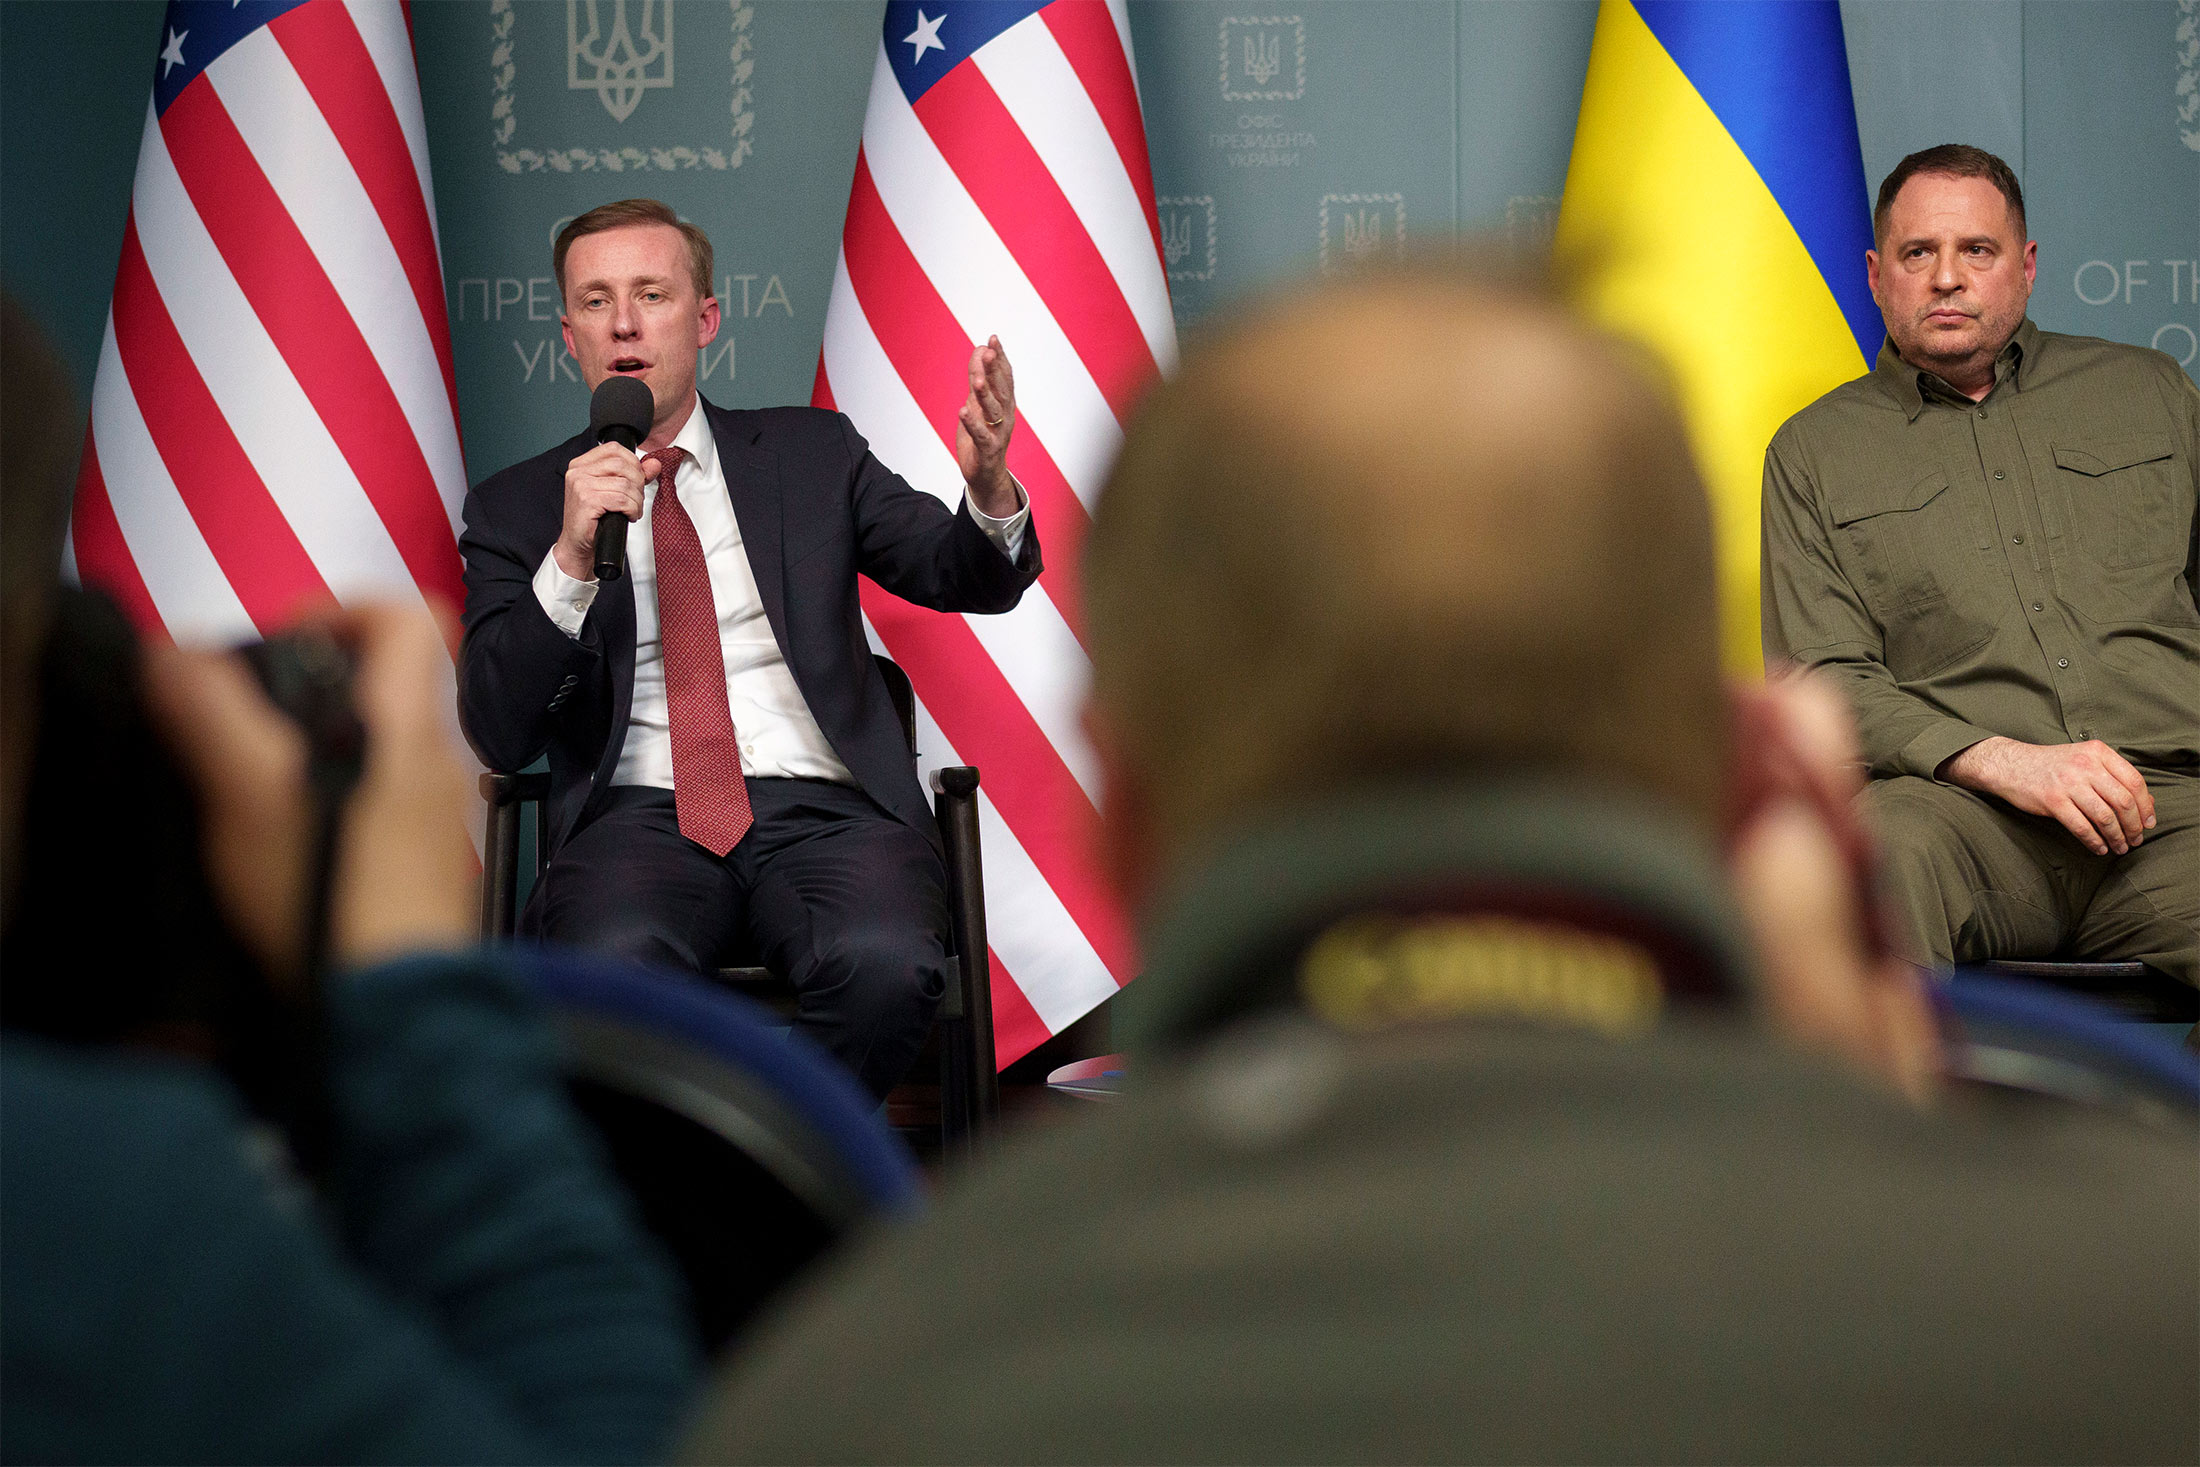 Jake Sullivan, left, speaks during a joint news conference with&nbsp;Andriy Yermak, head of the Office of the President of Ukraine, in Kyiv on March 20.